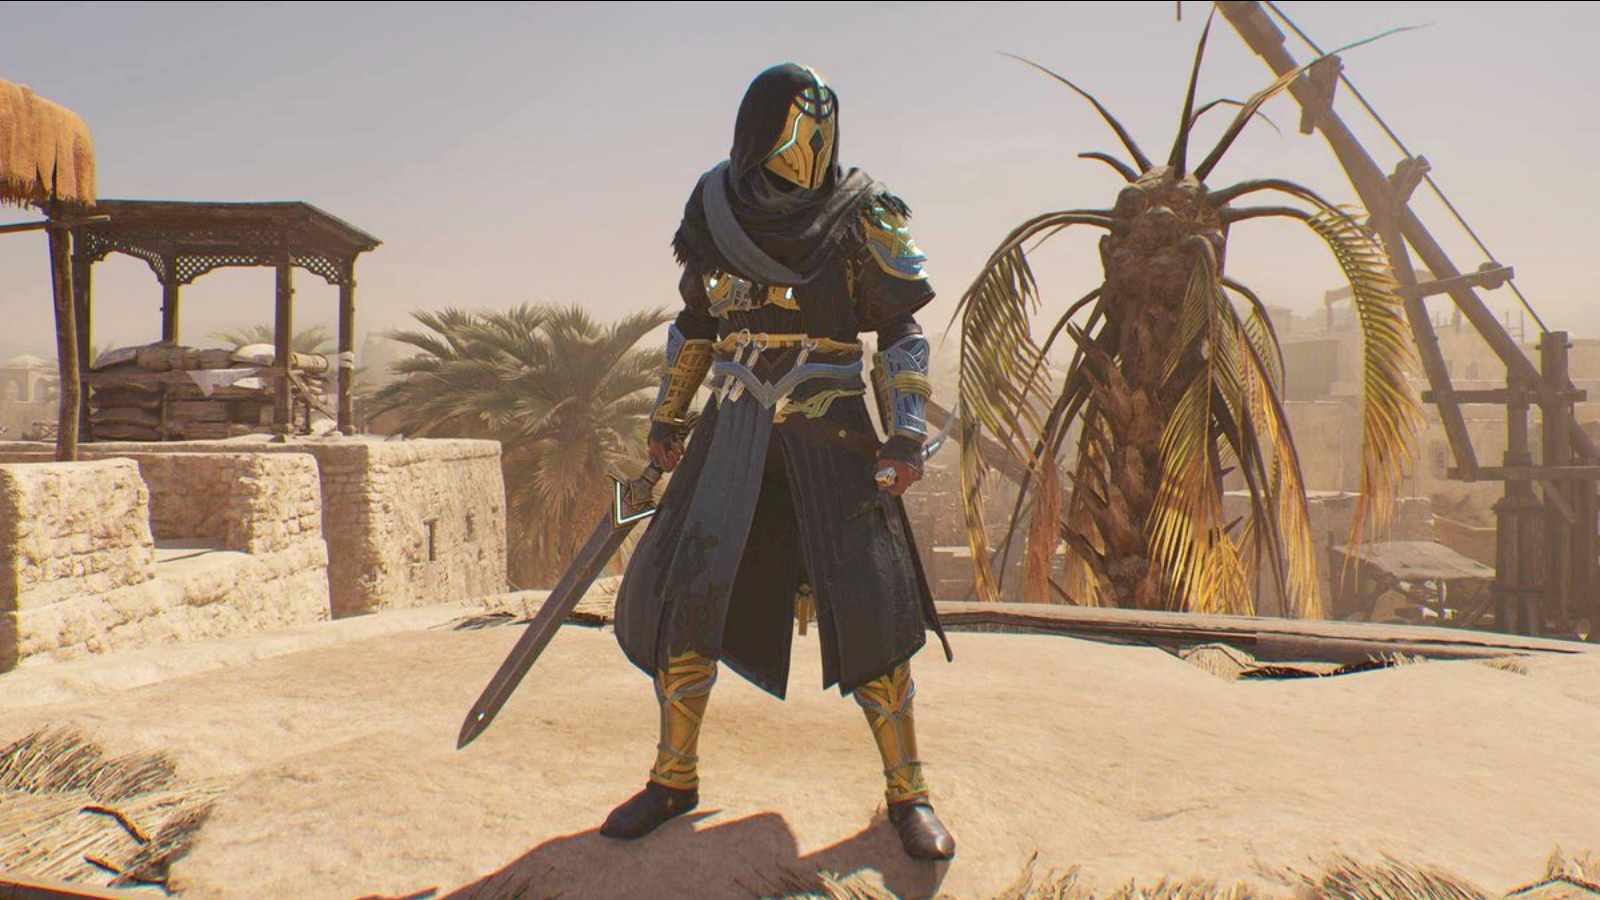 Assassin's Creed Mirage' falls short of returning to series' great roots